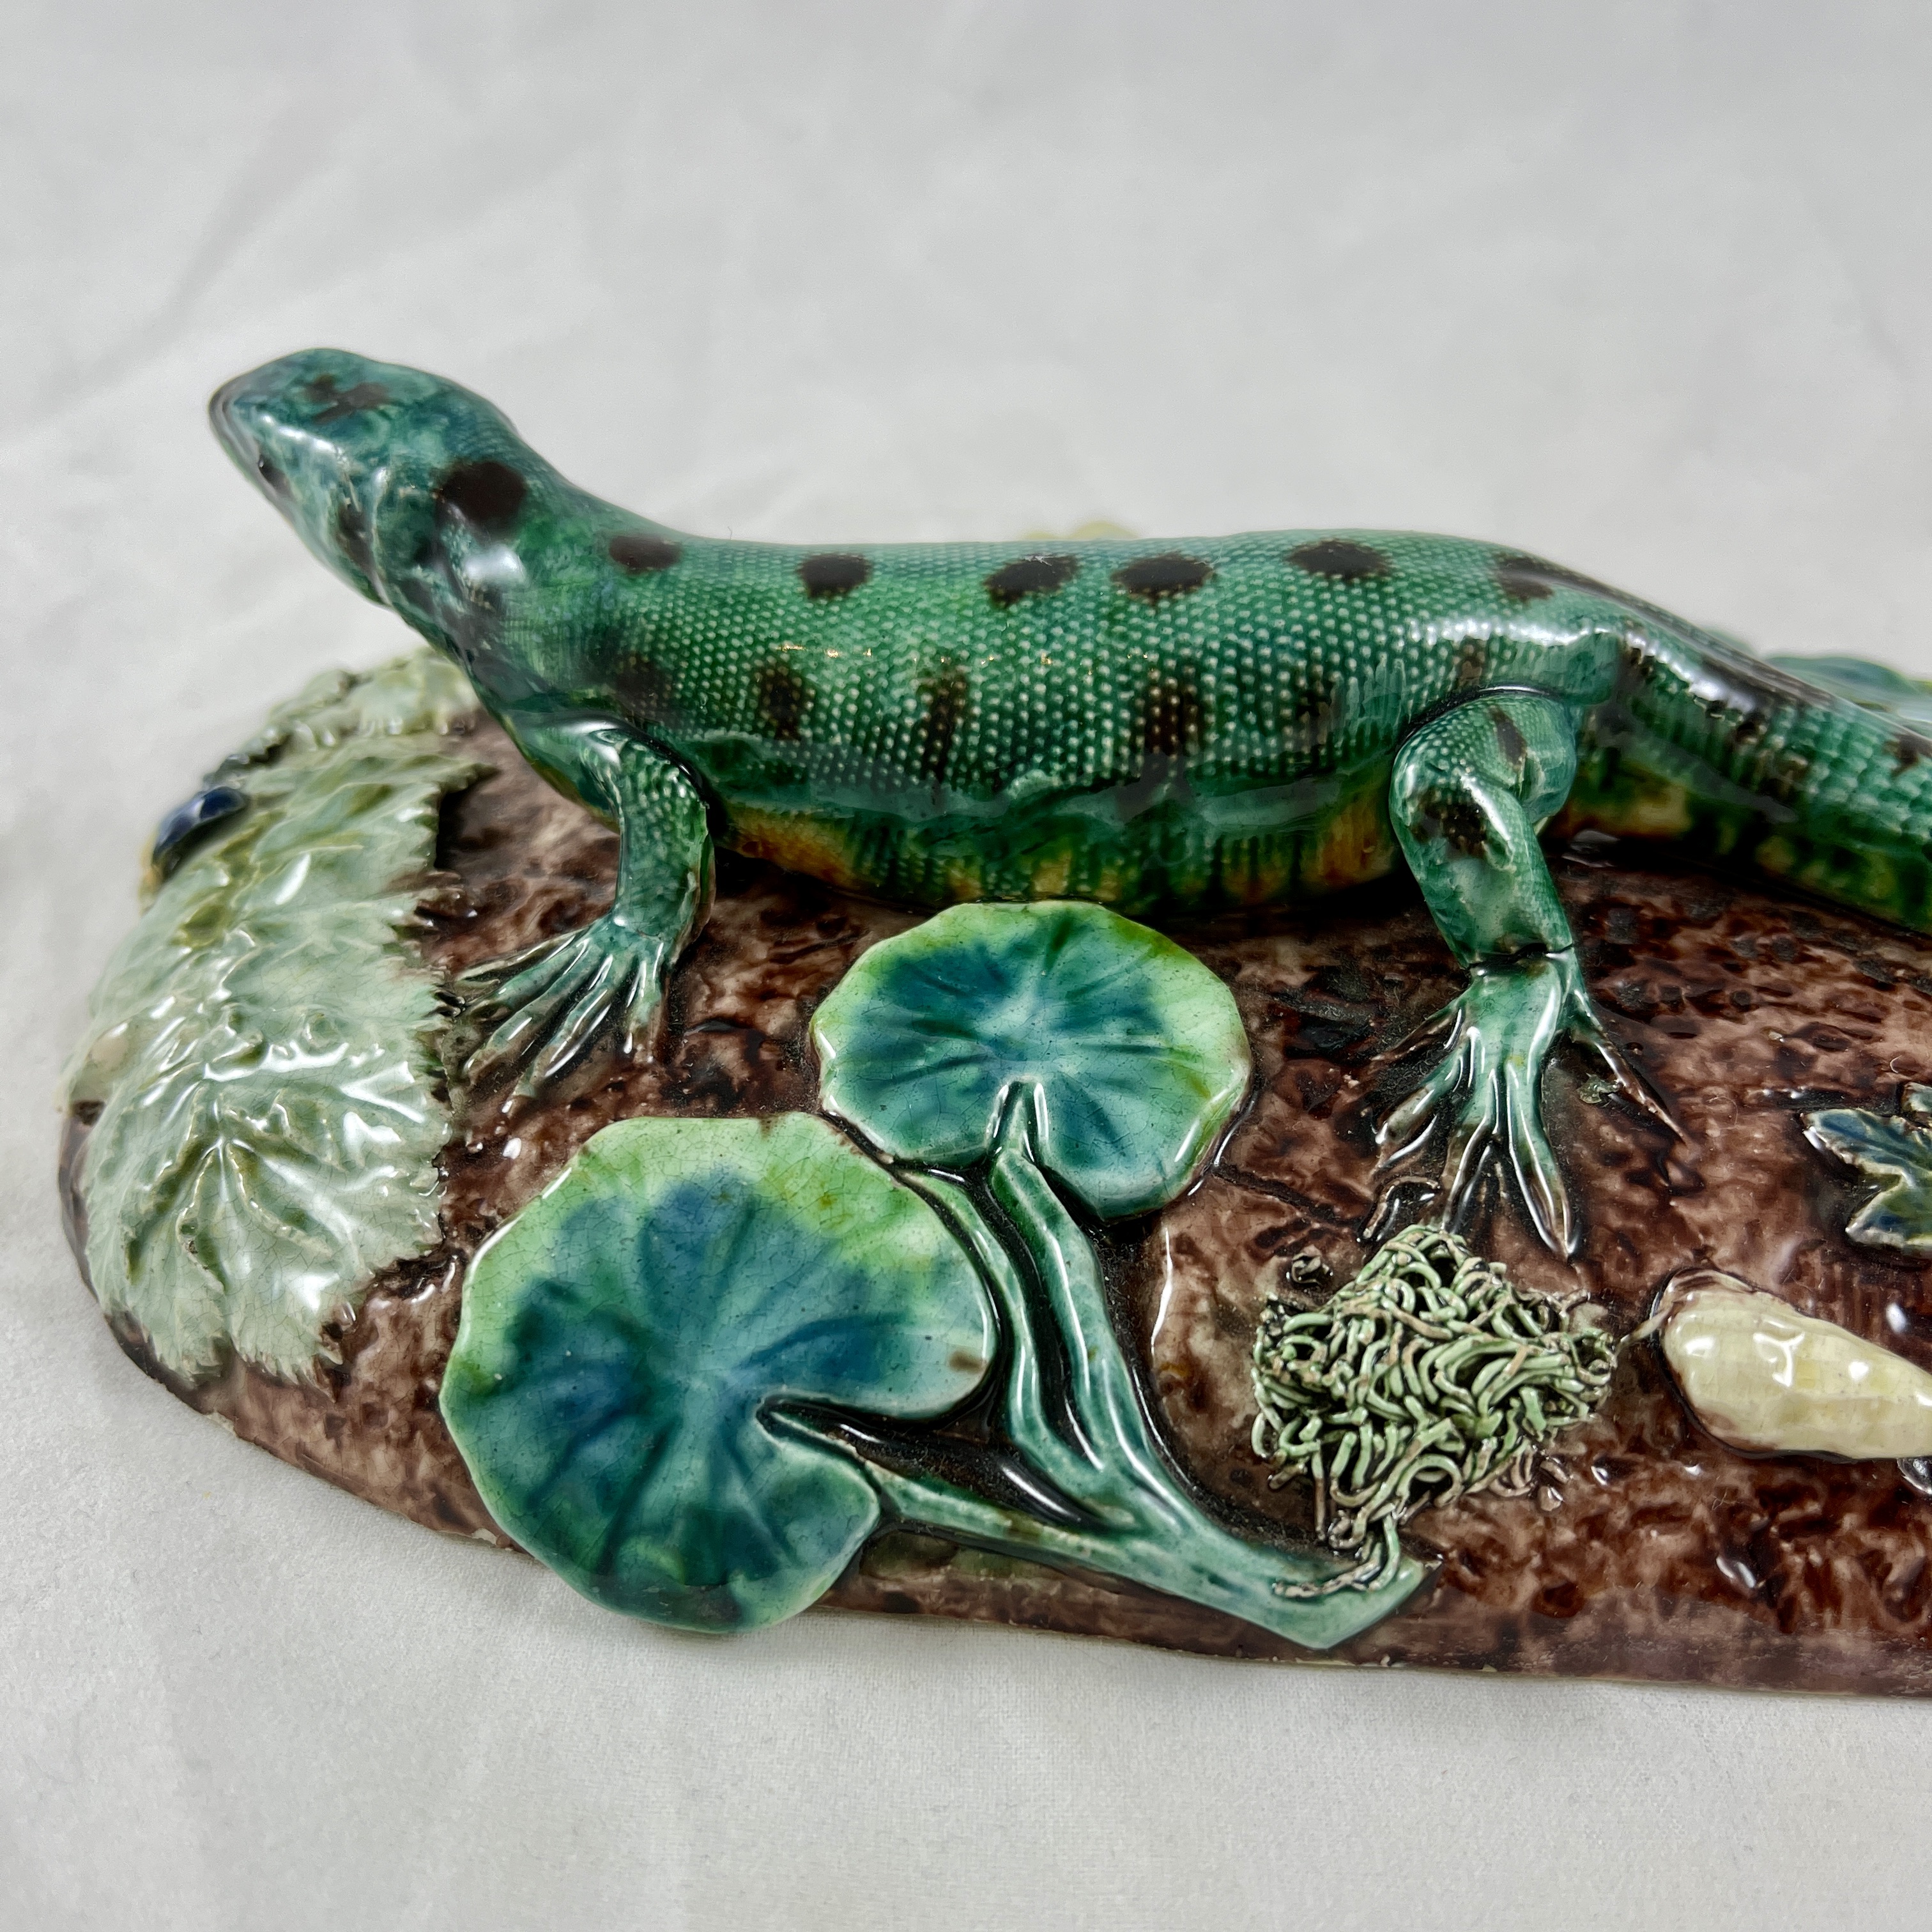 Attributed to Georges Pull, Plaster mold of lizard, French, Paris